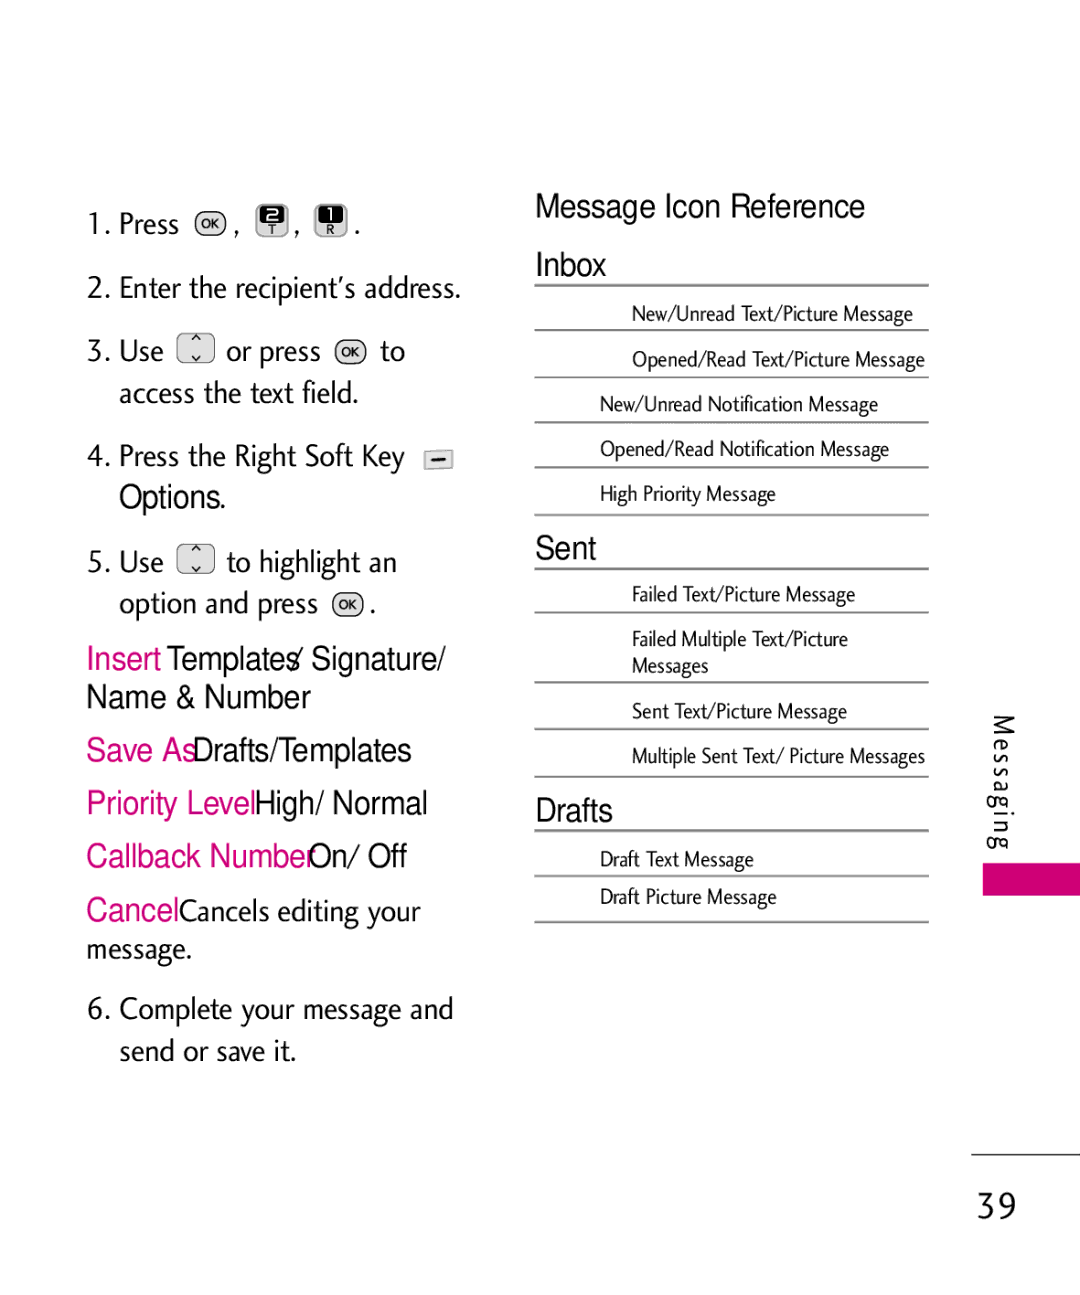 LG Electronics UN200 Message Icon Reference, Inbox, Insert Templates/ Signature Name & Number, Save As Drafts/Templates 